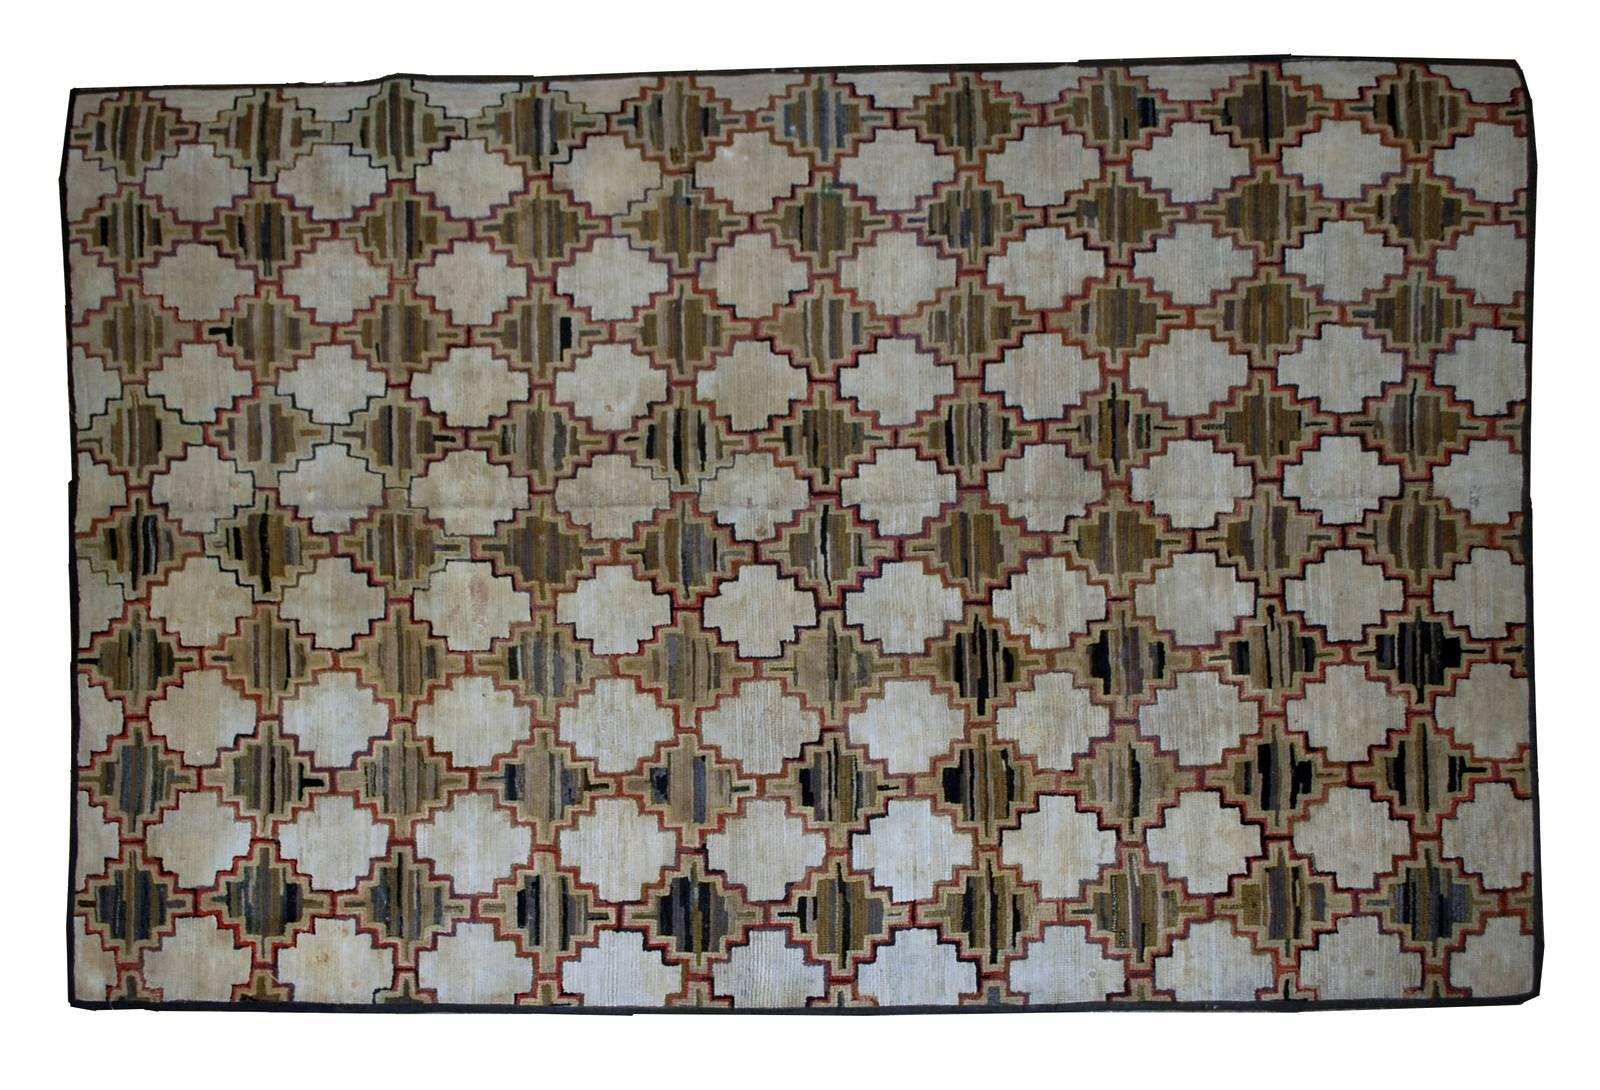 Antique decorative American hooked rug. Beautiful all-over design in repeating geometric pattern- diamond shaped figures in beige and shade of brown with olive green abrashes. The rug has been restored and in good condition now.
 